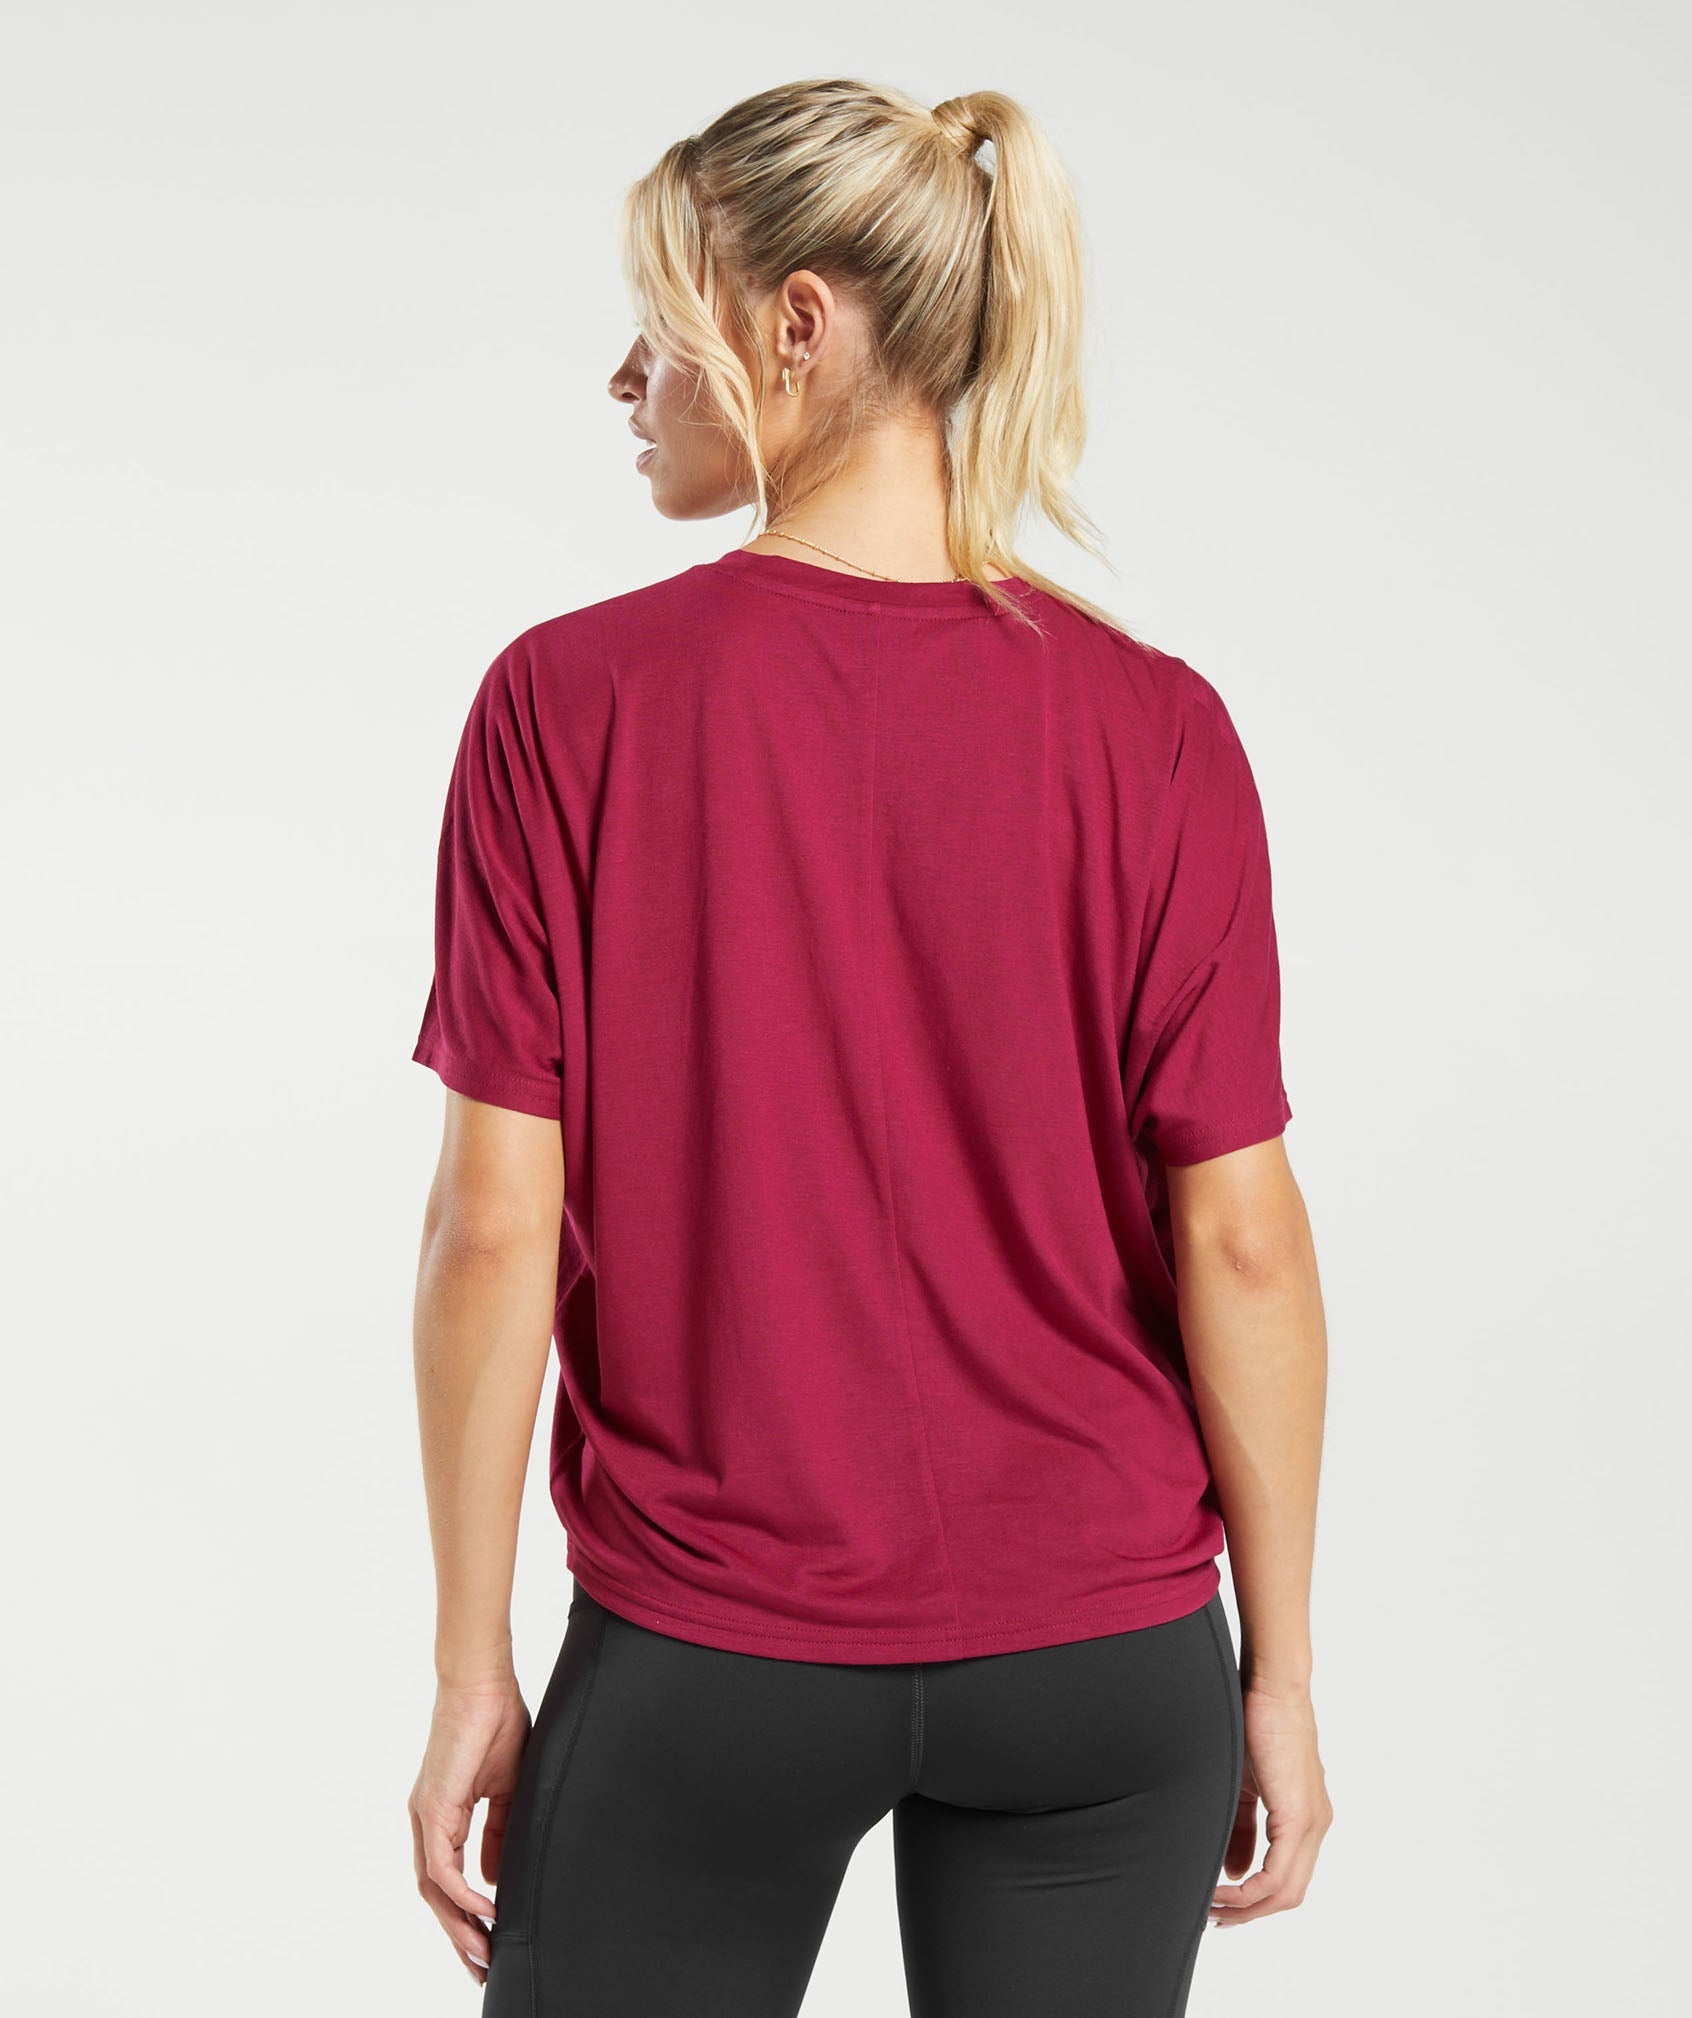 Super Soft T-Shirt in Raspberry Pink - view 2